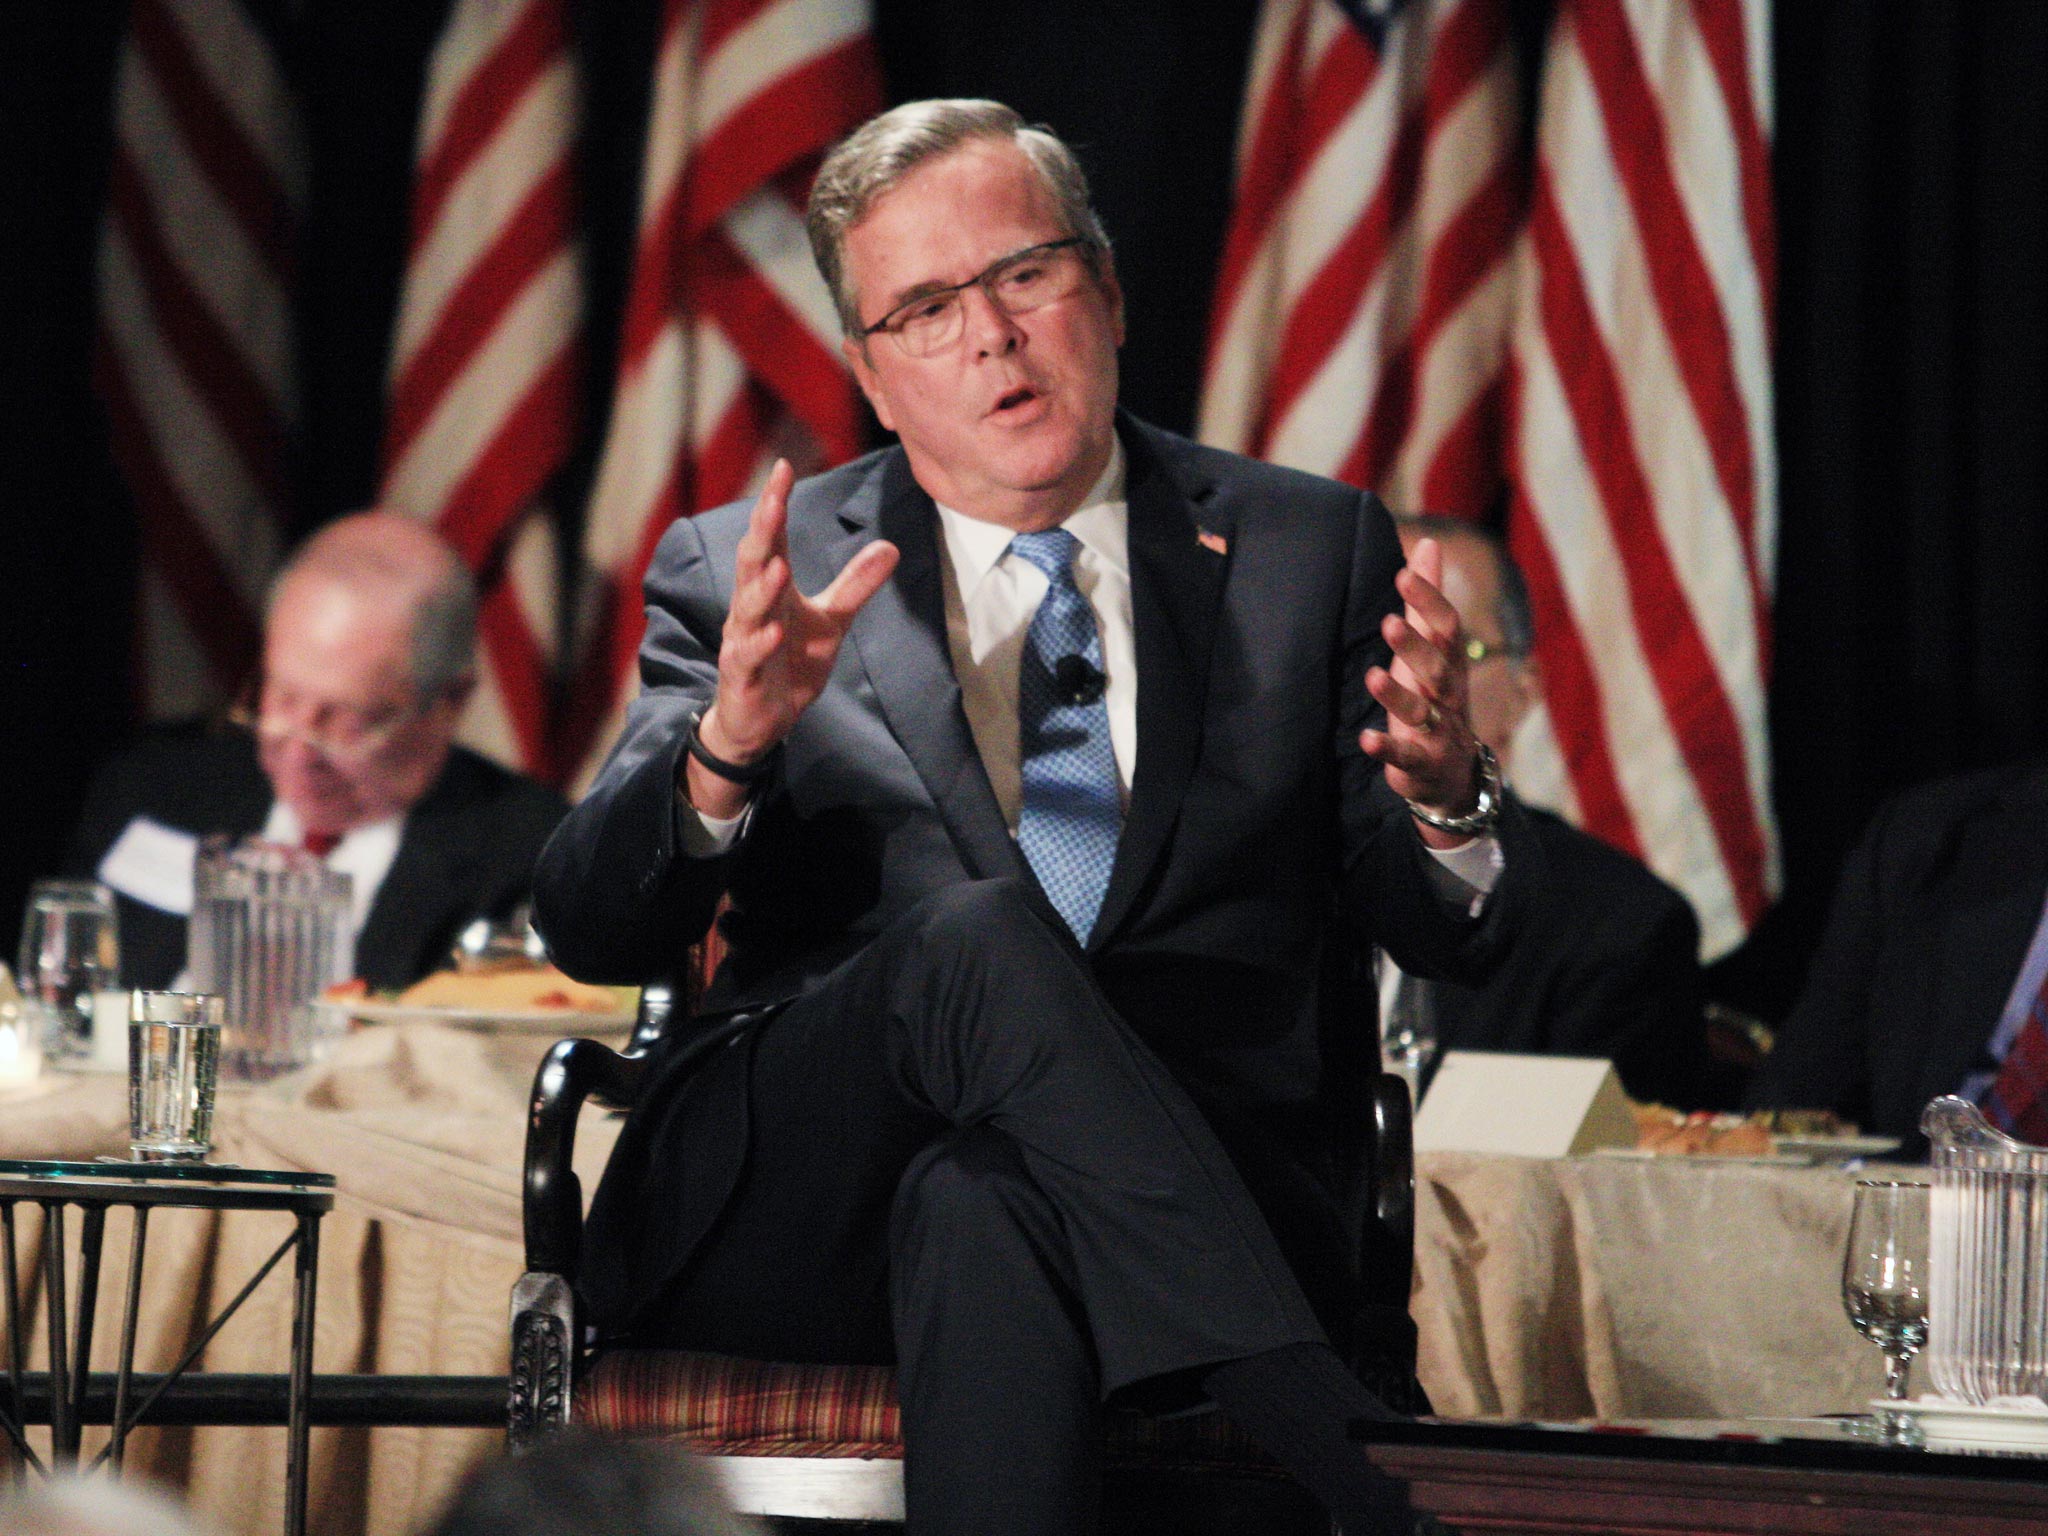 Jeb Bush says he spends every day trying not to think about
whether to run for the presidency